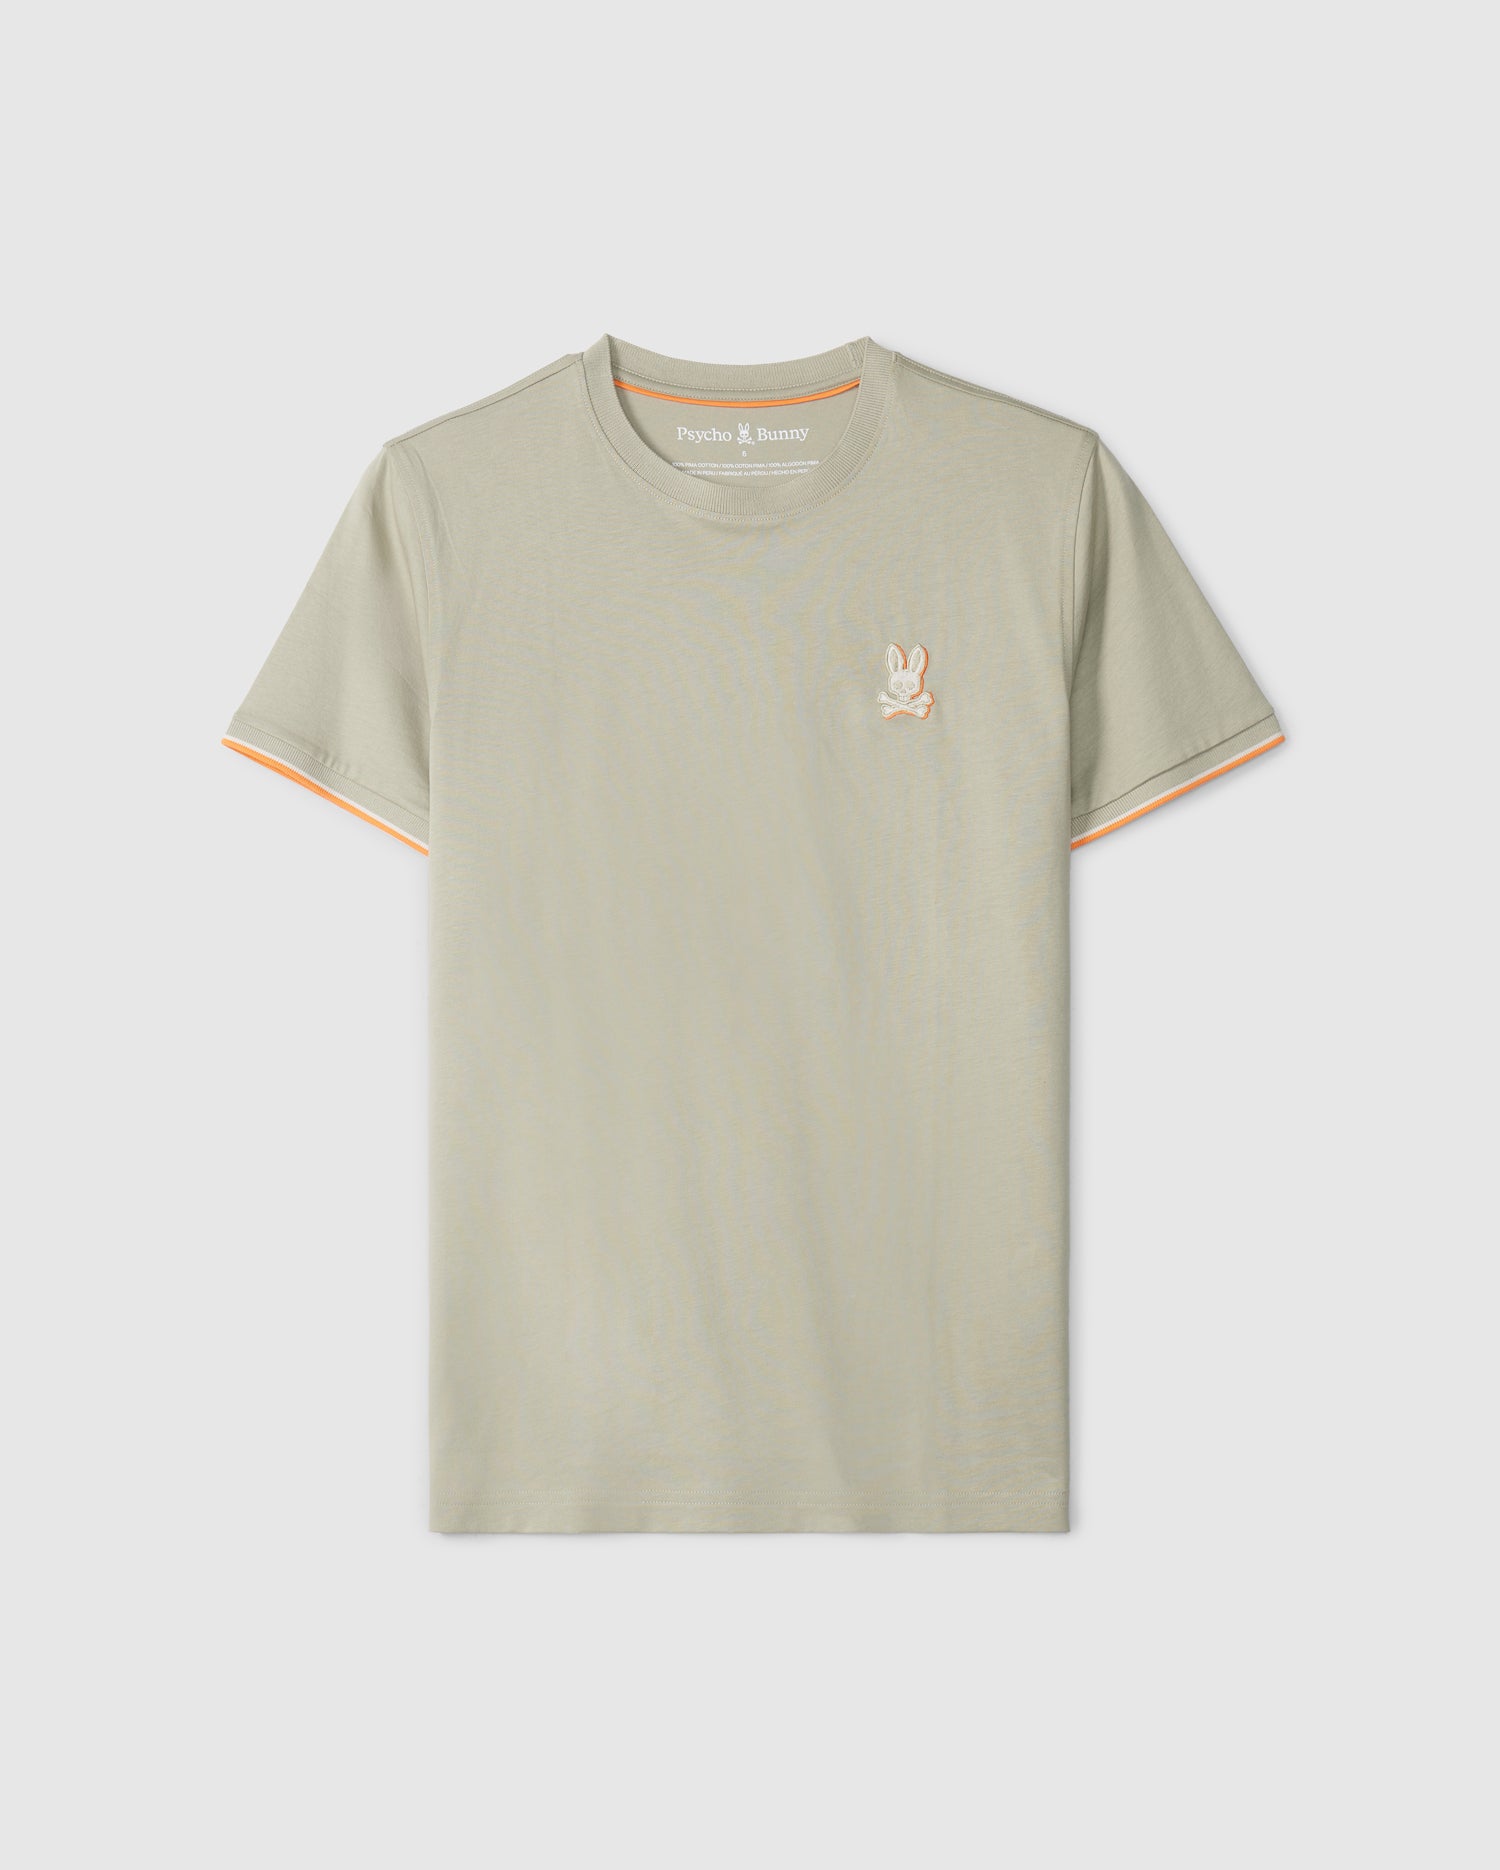 A light gray MENS KAYDEN FASHION TEE - B6U577C200 crafted from premium Pima cotton, featuring a round neckline and short sleeves. It boasts a small embroidered white bunny logo on the left chest and orange trim on the sleeve edges. The brand name 